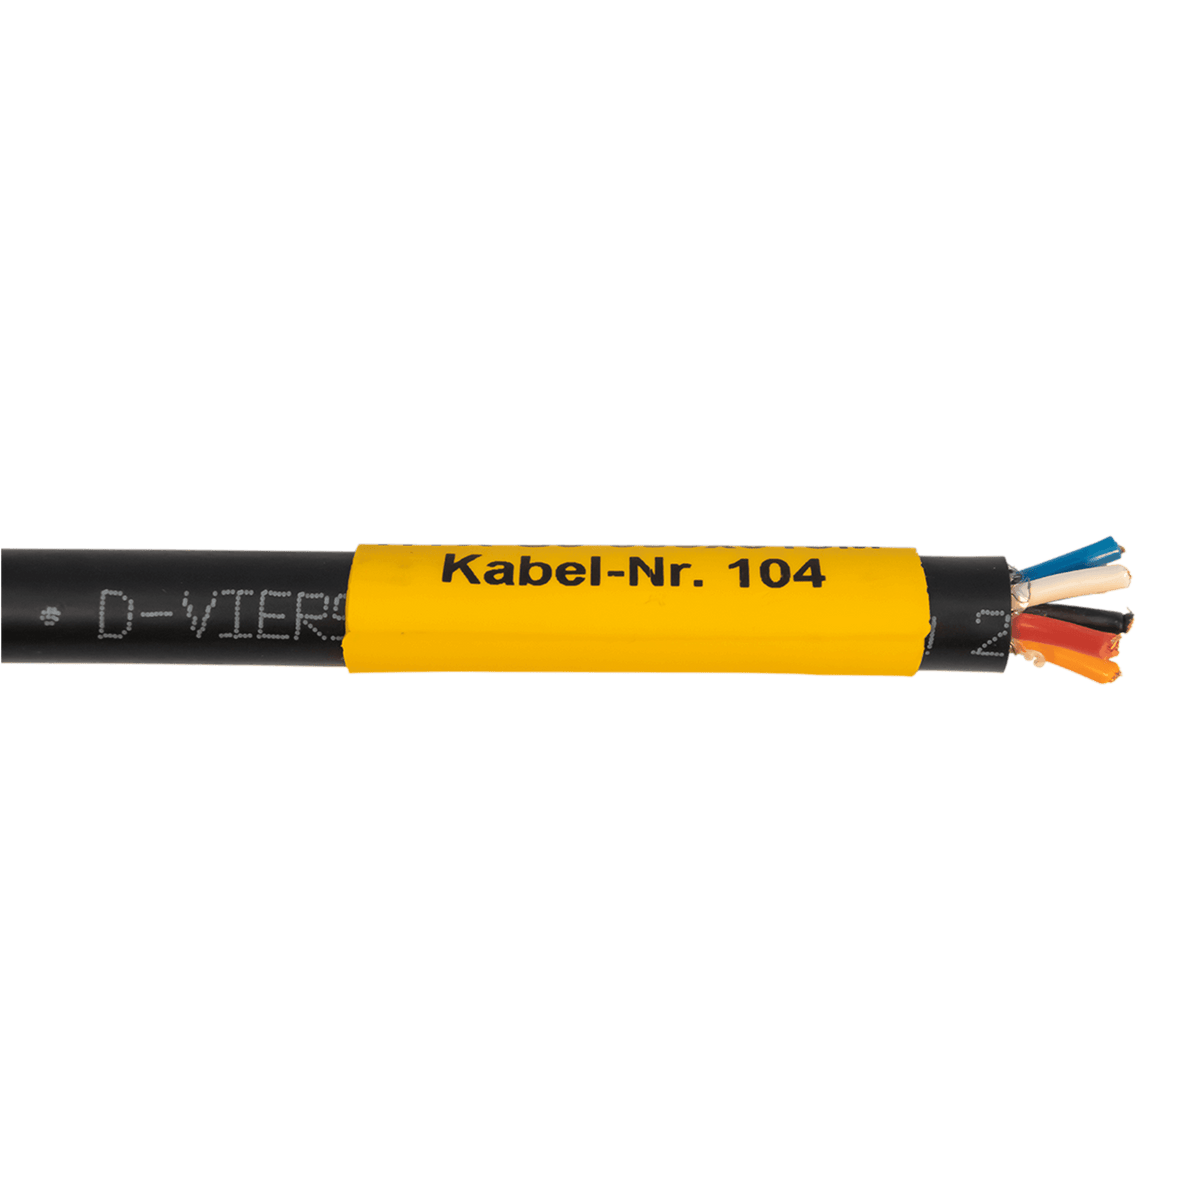 HTX-C3 Heat shrink marker, endless (jumbo roll), attached to one end of heat shrink tubing